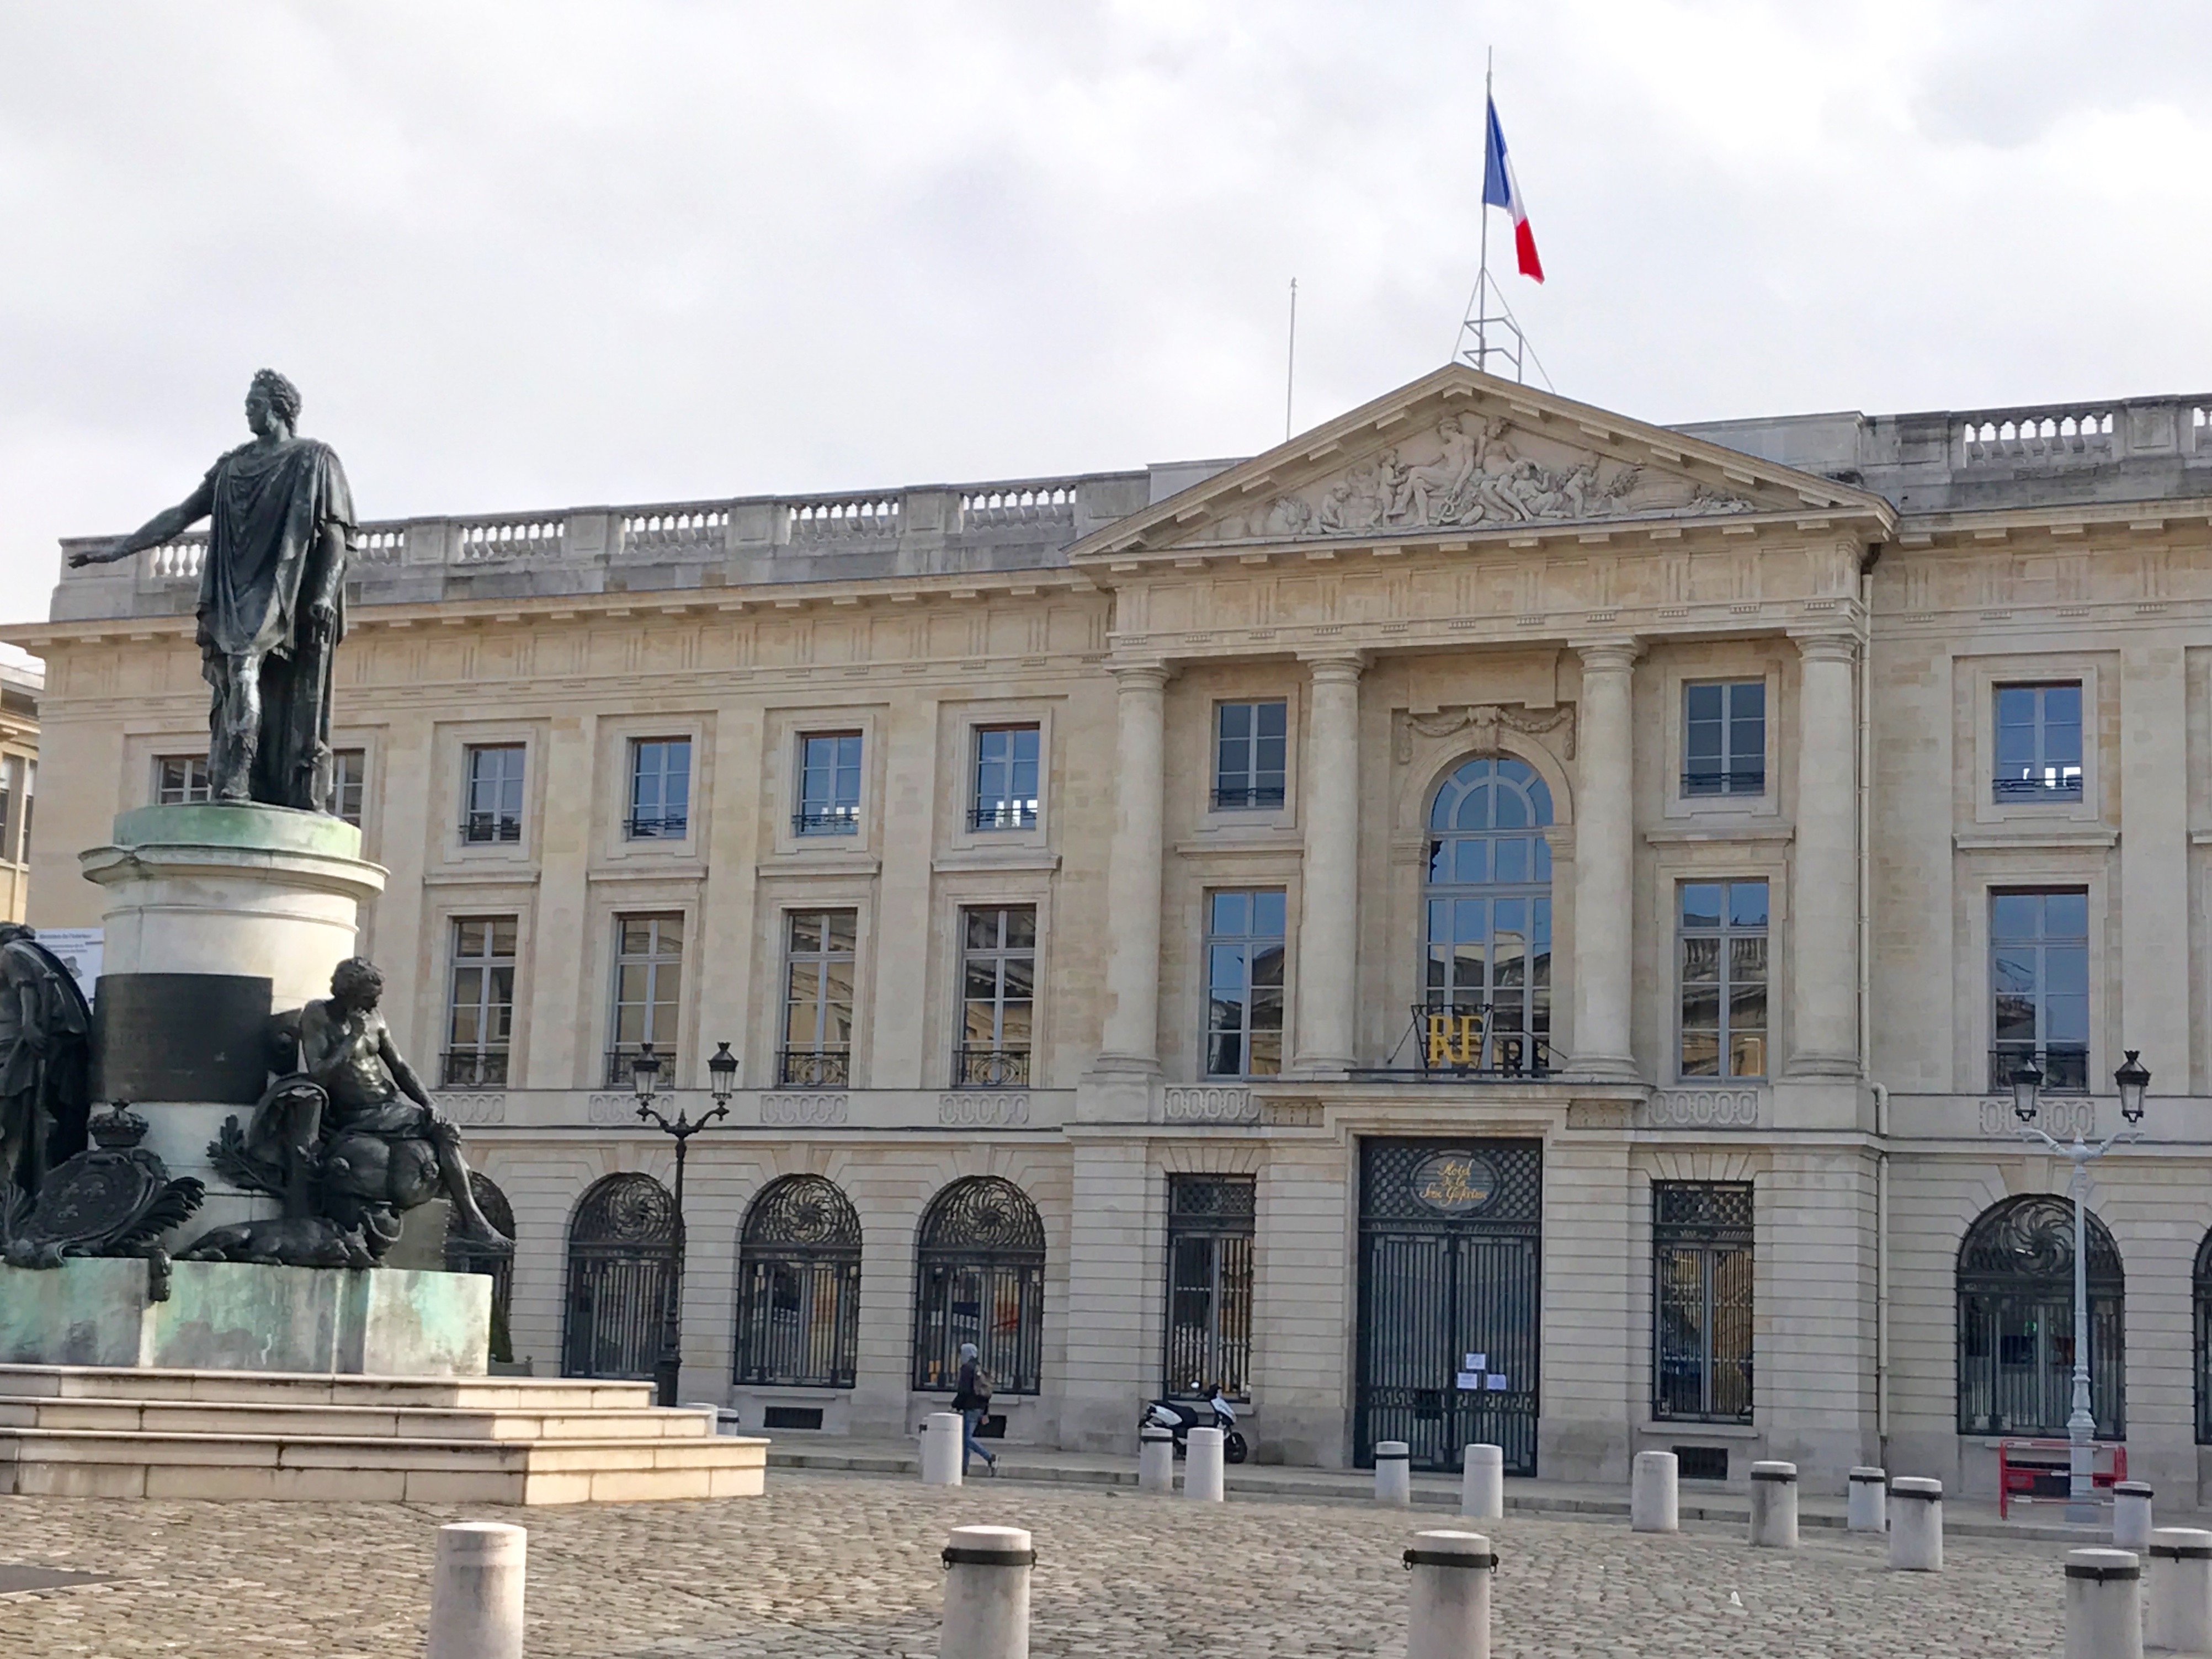 City Hall at Reims in Neo-classical style.